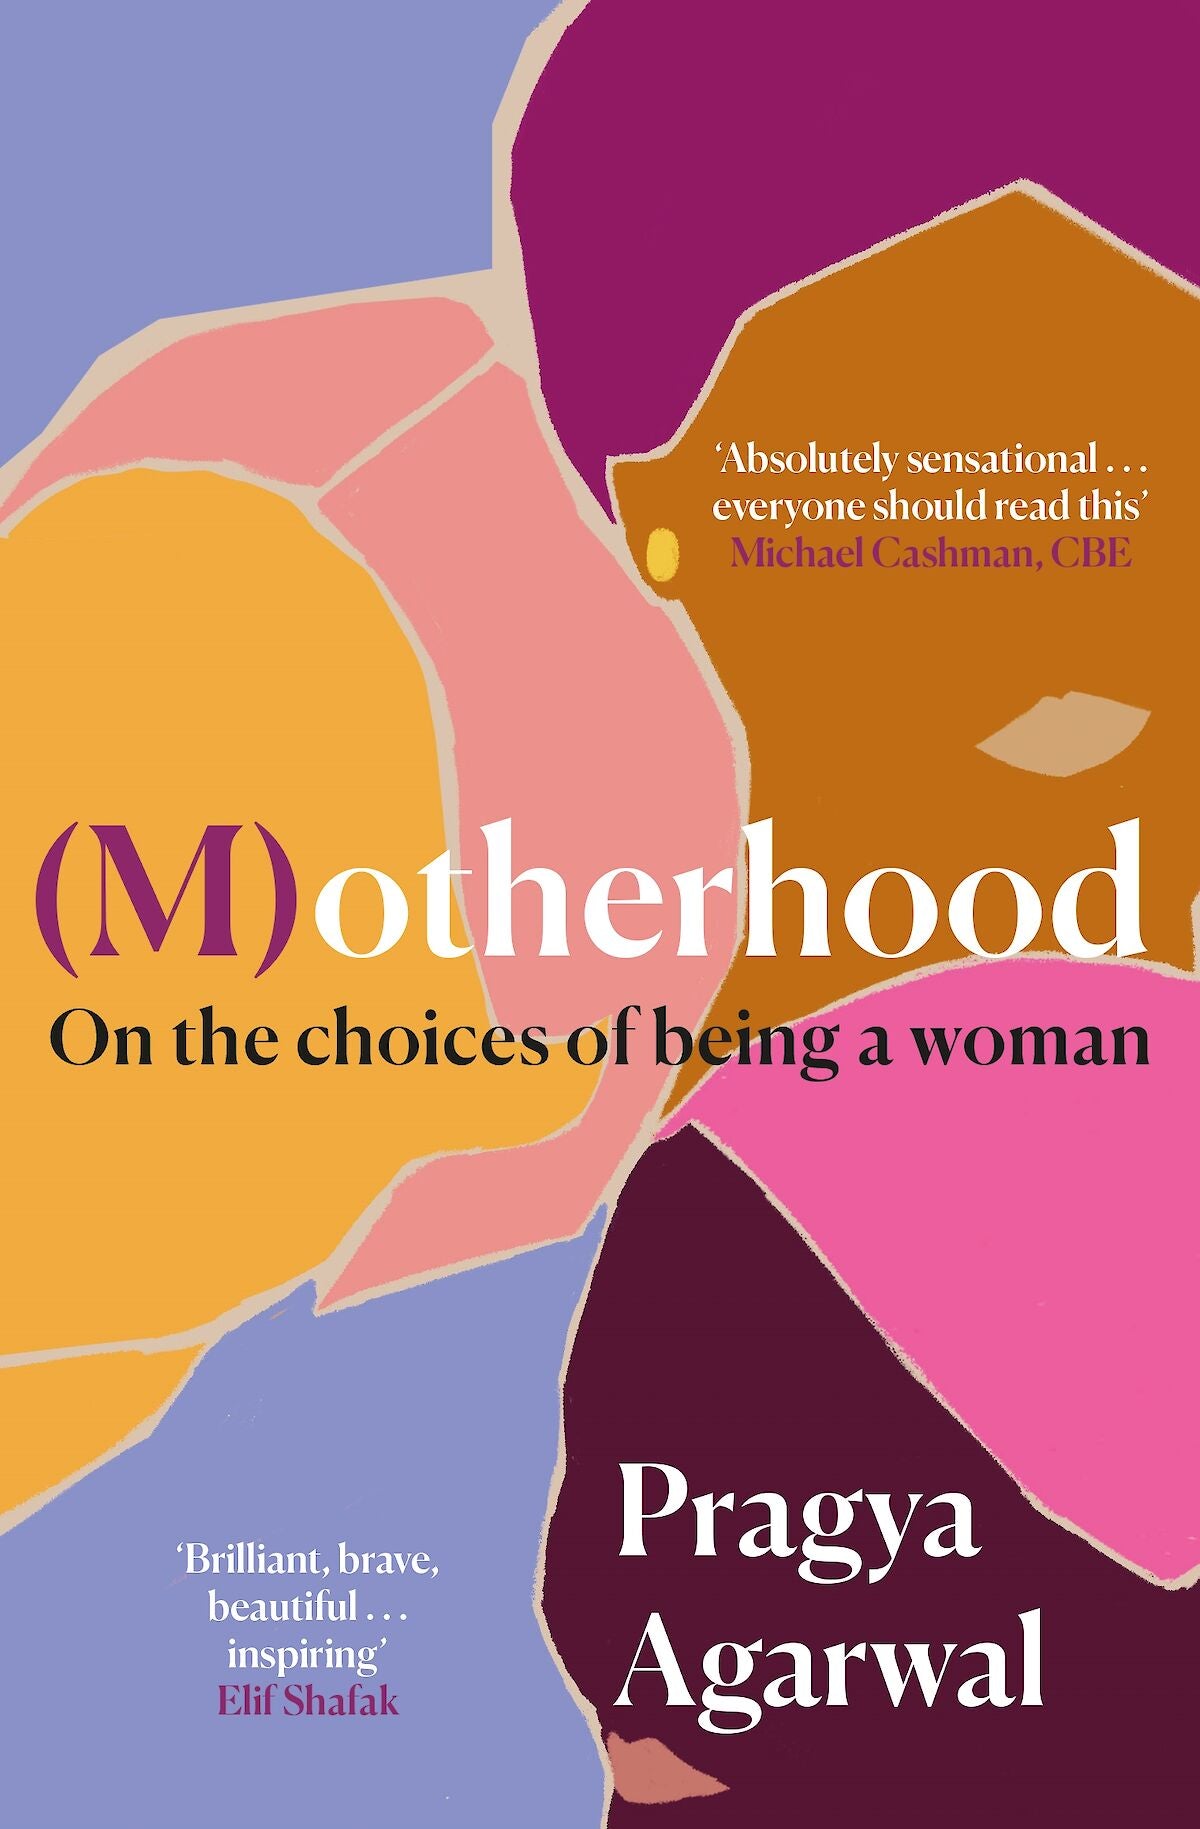 (M)otherhood. On the choices of being a woman